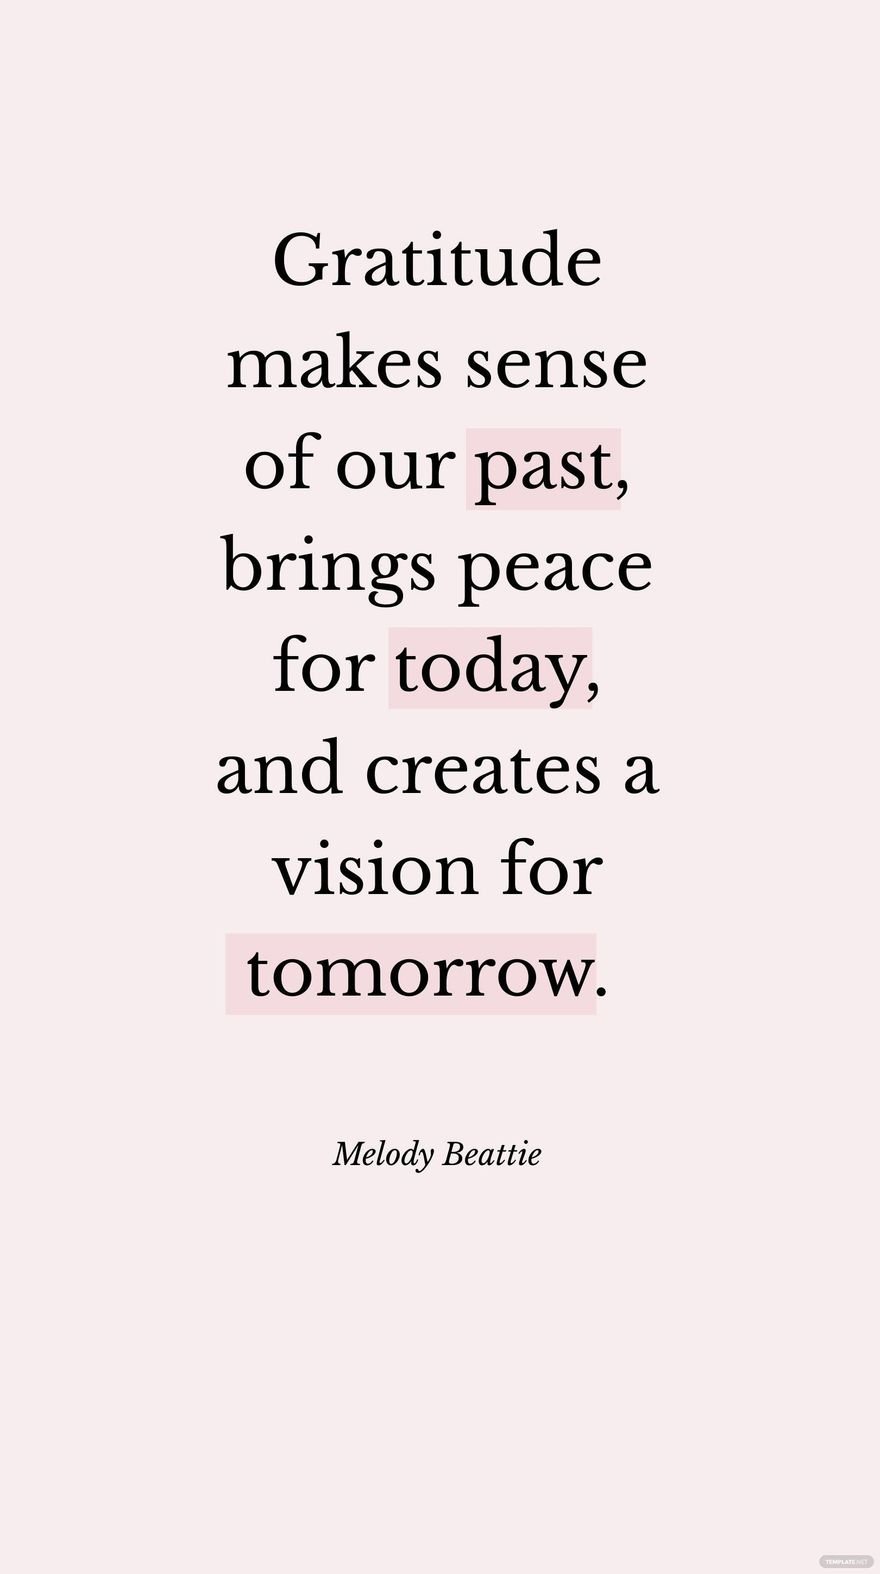 Free Melody Beattie - Gratitude makes sense of our past, brings peace for today, and creates a vision for tomorrow. in JPG